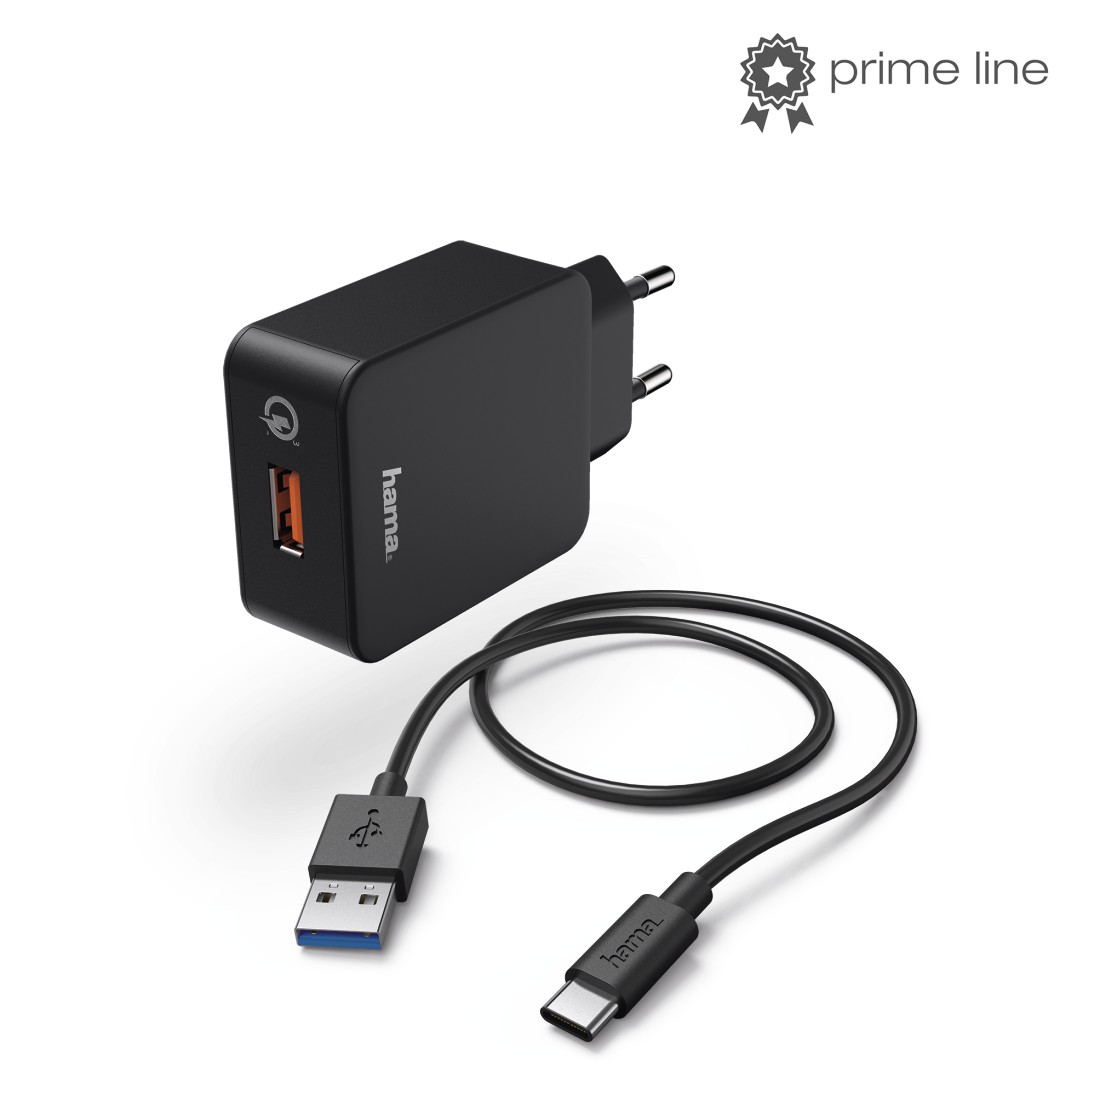 00178393 Hama Charger Kit, USB Type-C, 3 A, charger QC 3.0+ USB-C cable,  1.5 m, black